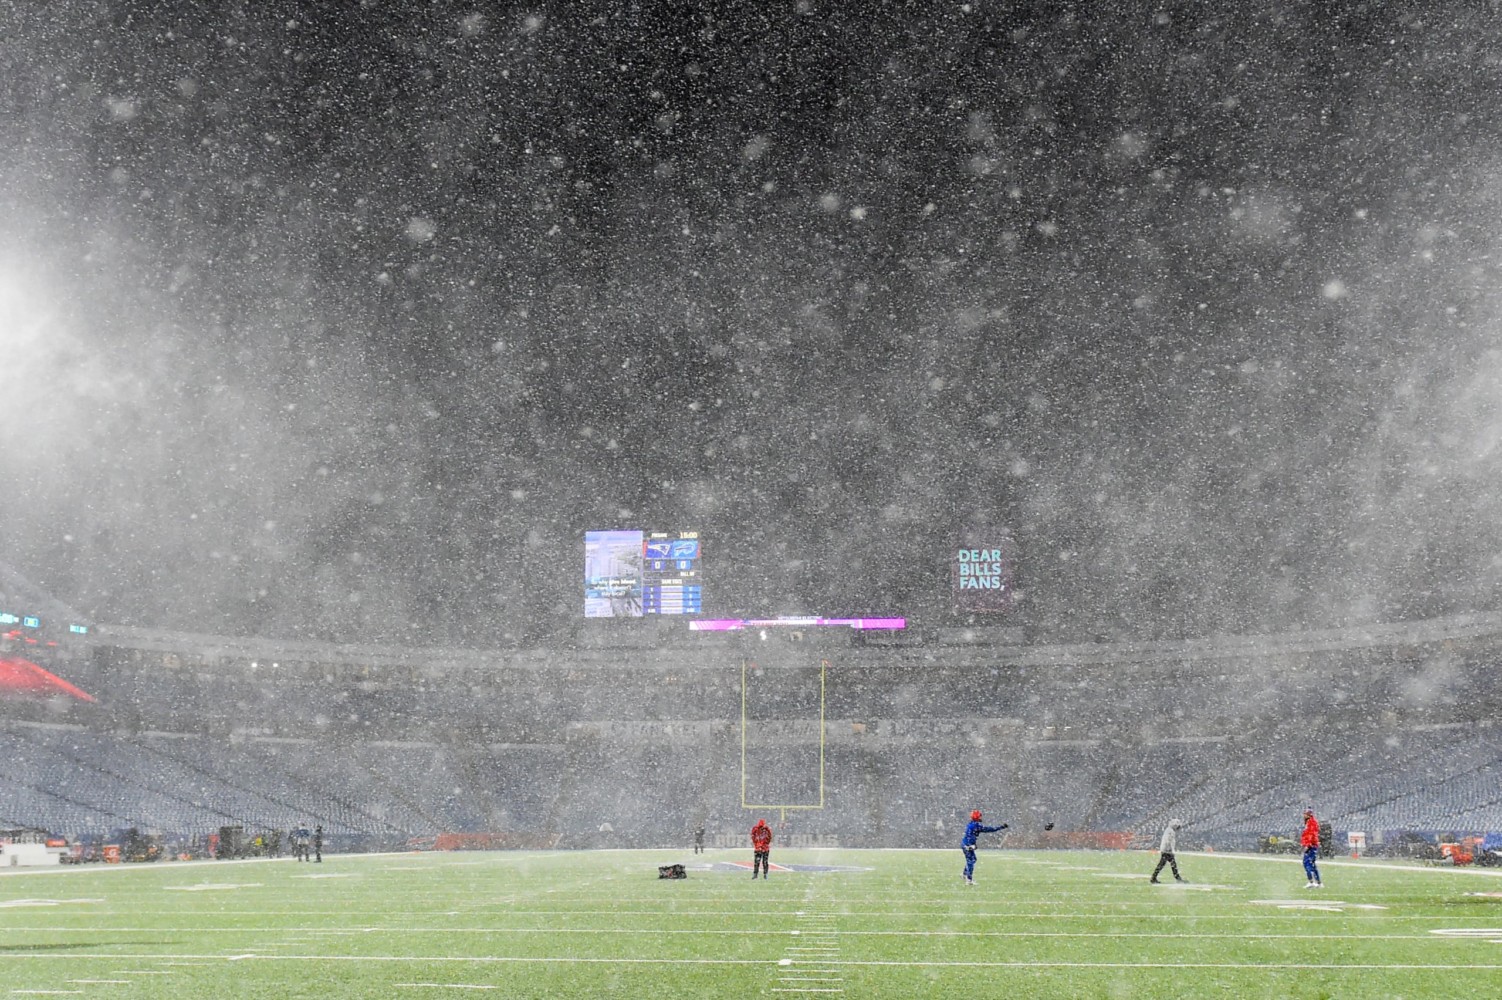 Players warming up in snow for NFL game in Buffalo